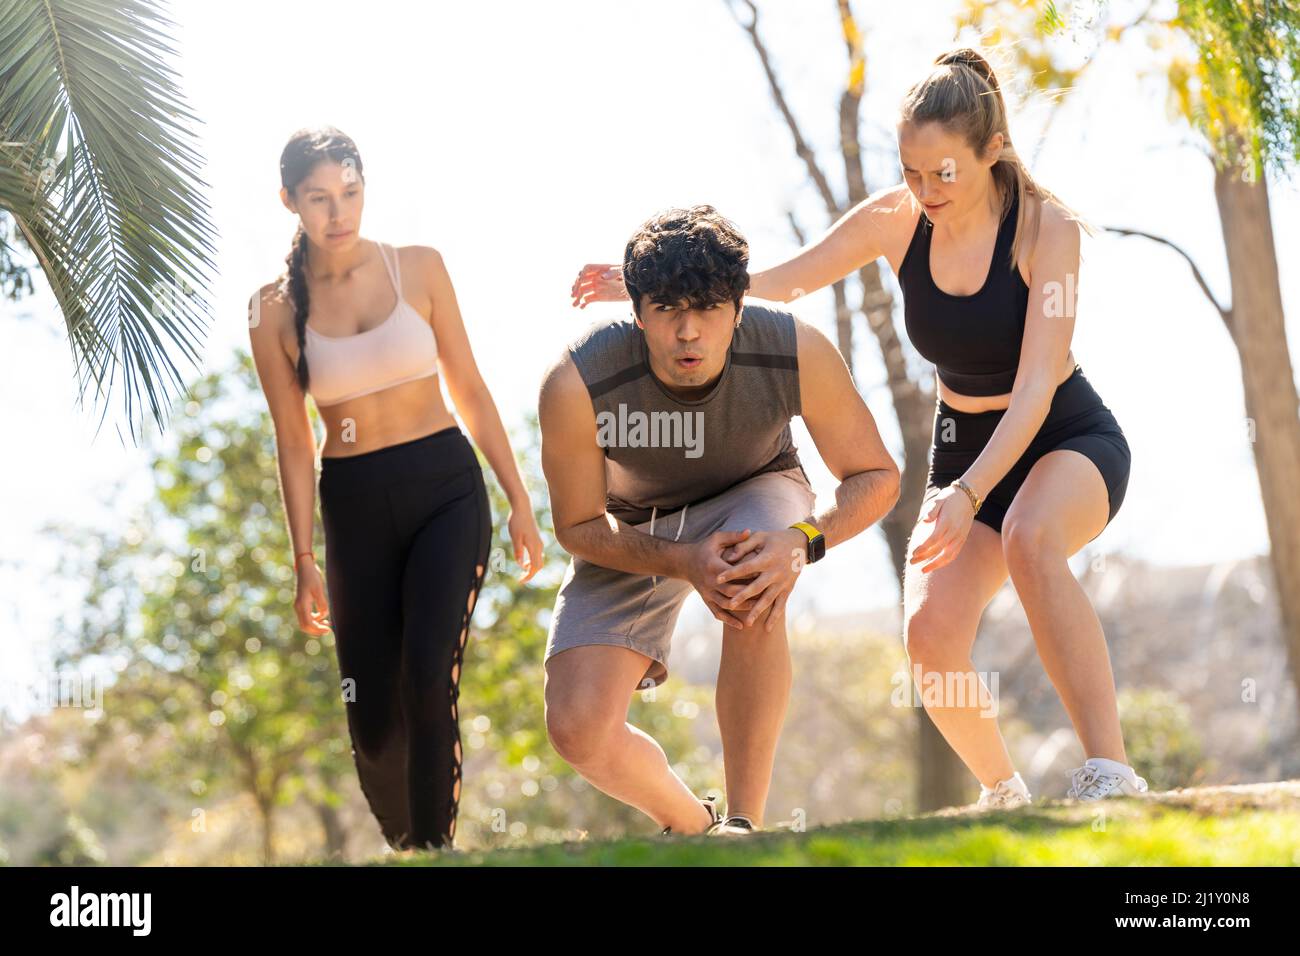 Two women help a man with an injured knee in the park Stock Photo